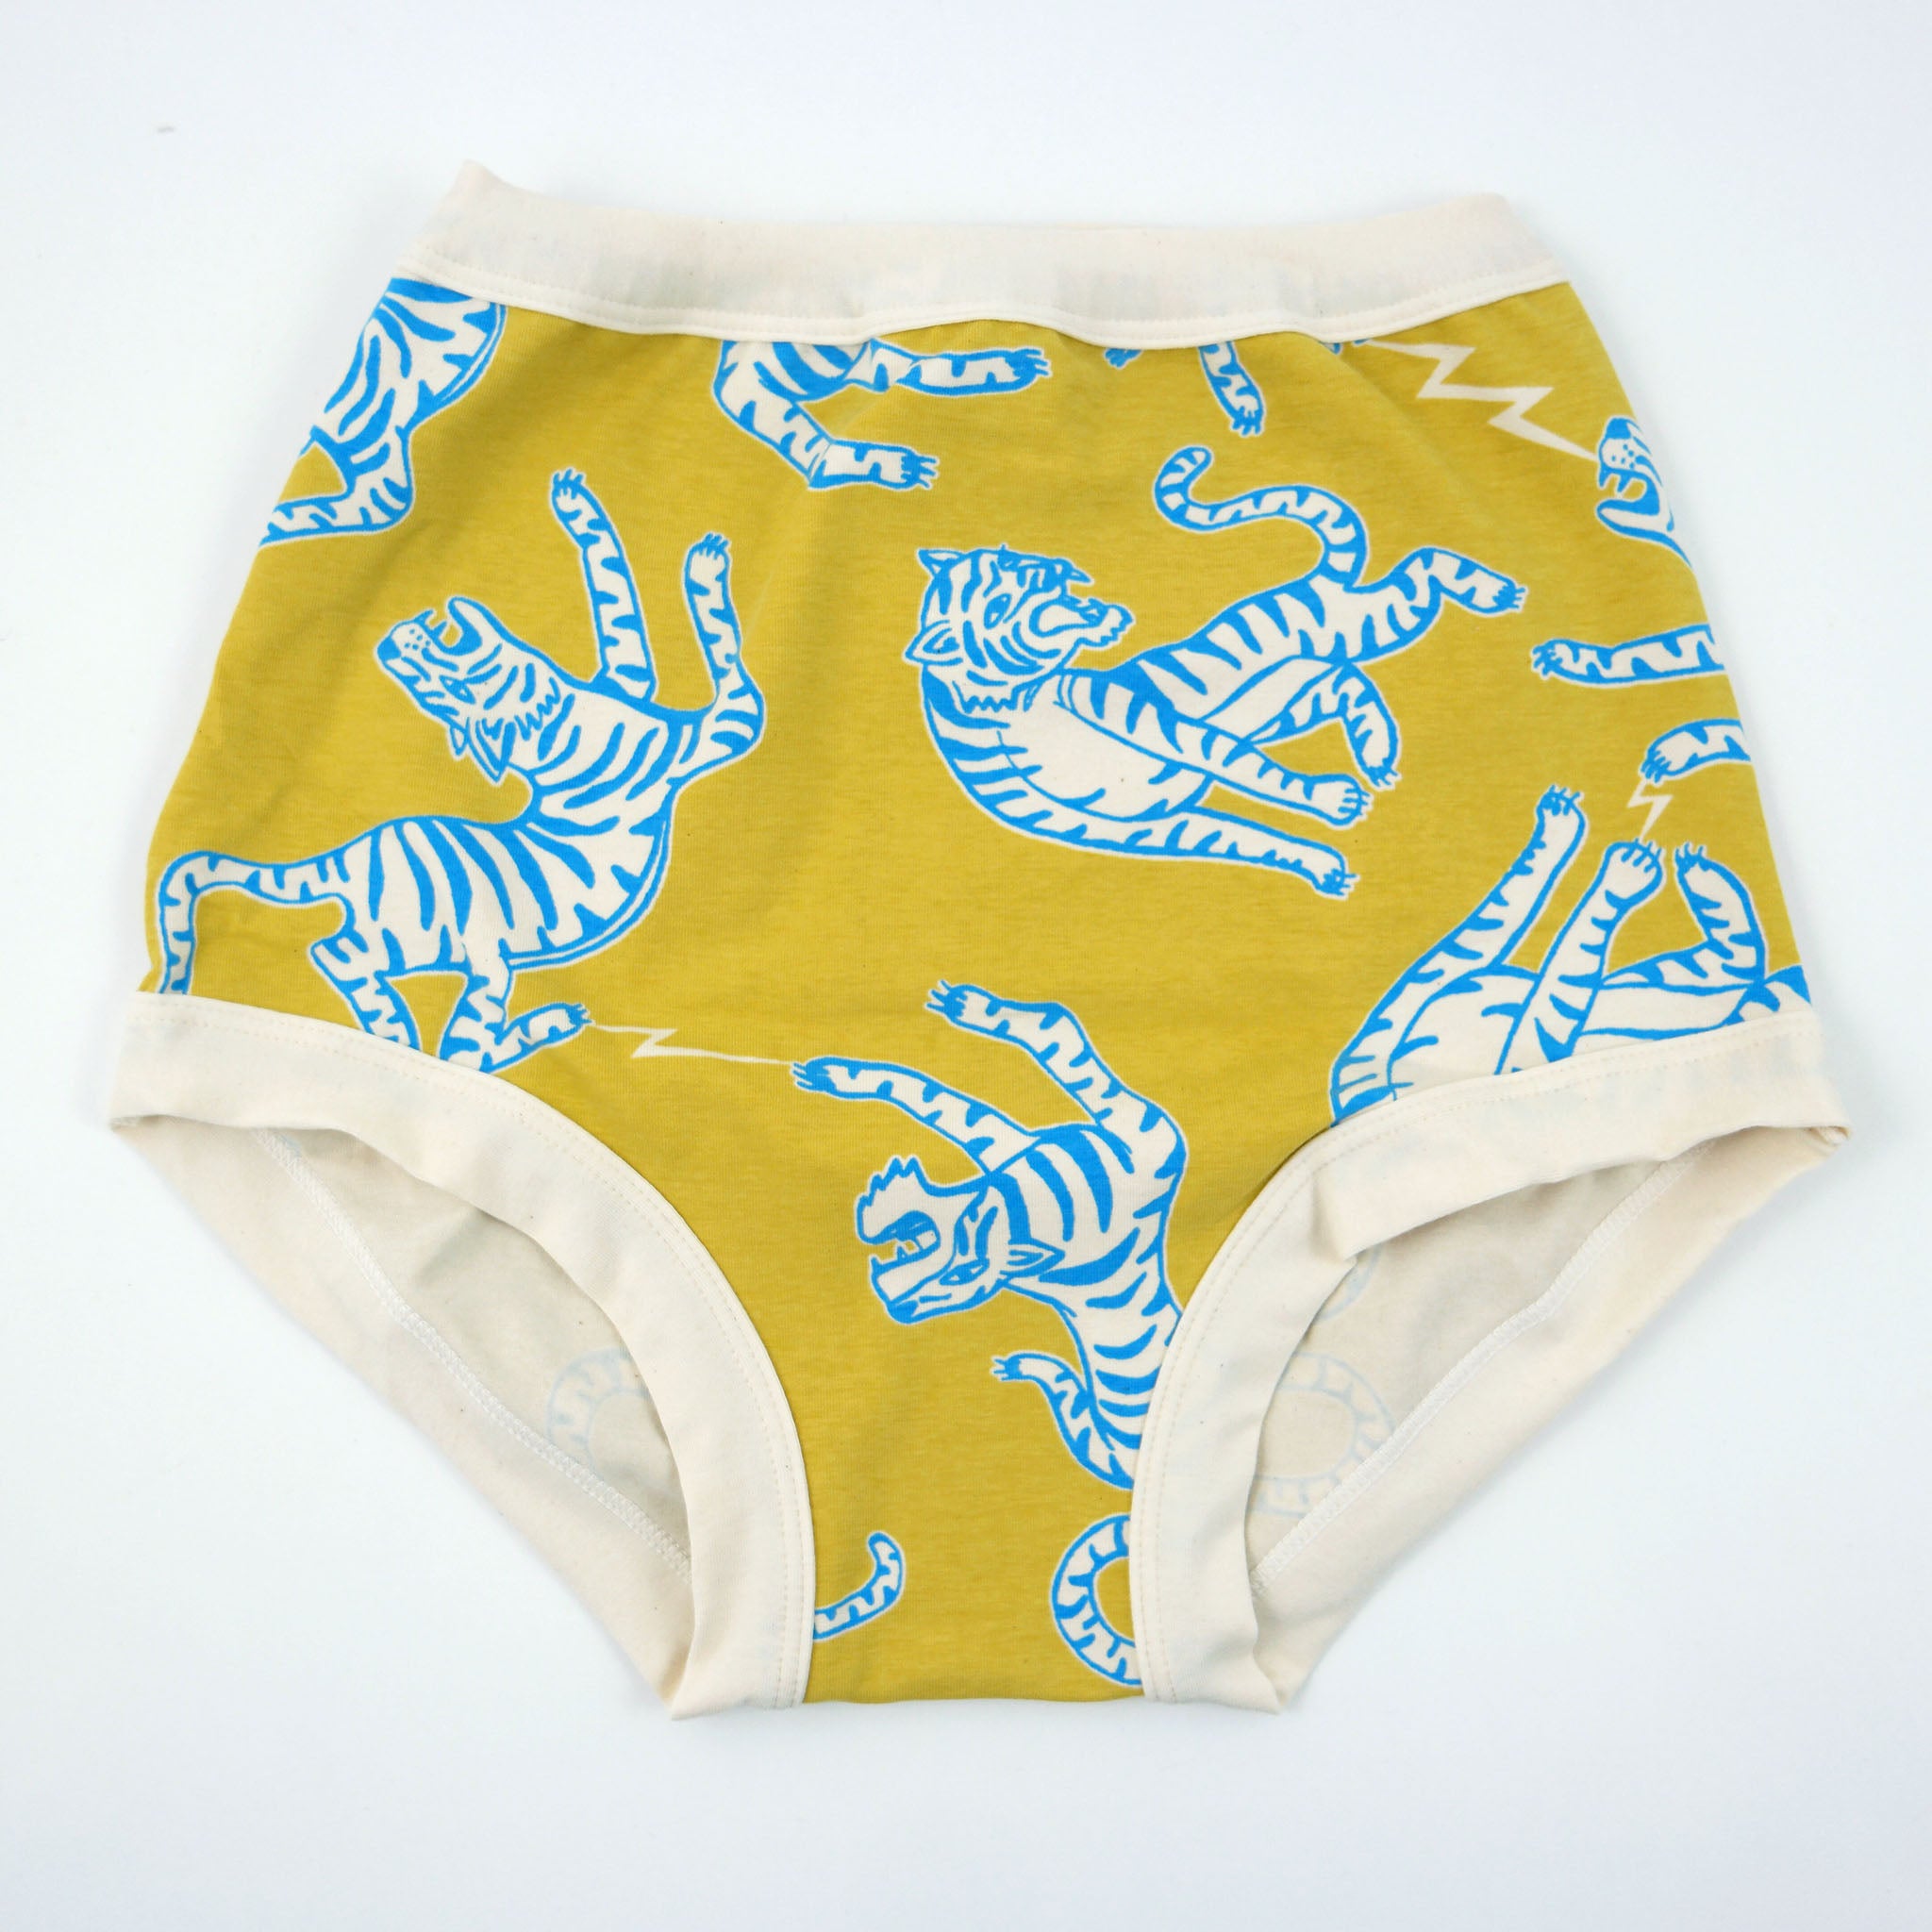 Thunderpants - Organic Cotton Underwear Made in the USA. Wedgie-Proof! –  Thunderpants USA